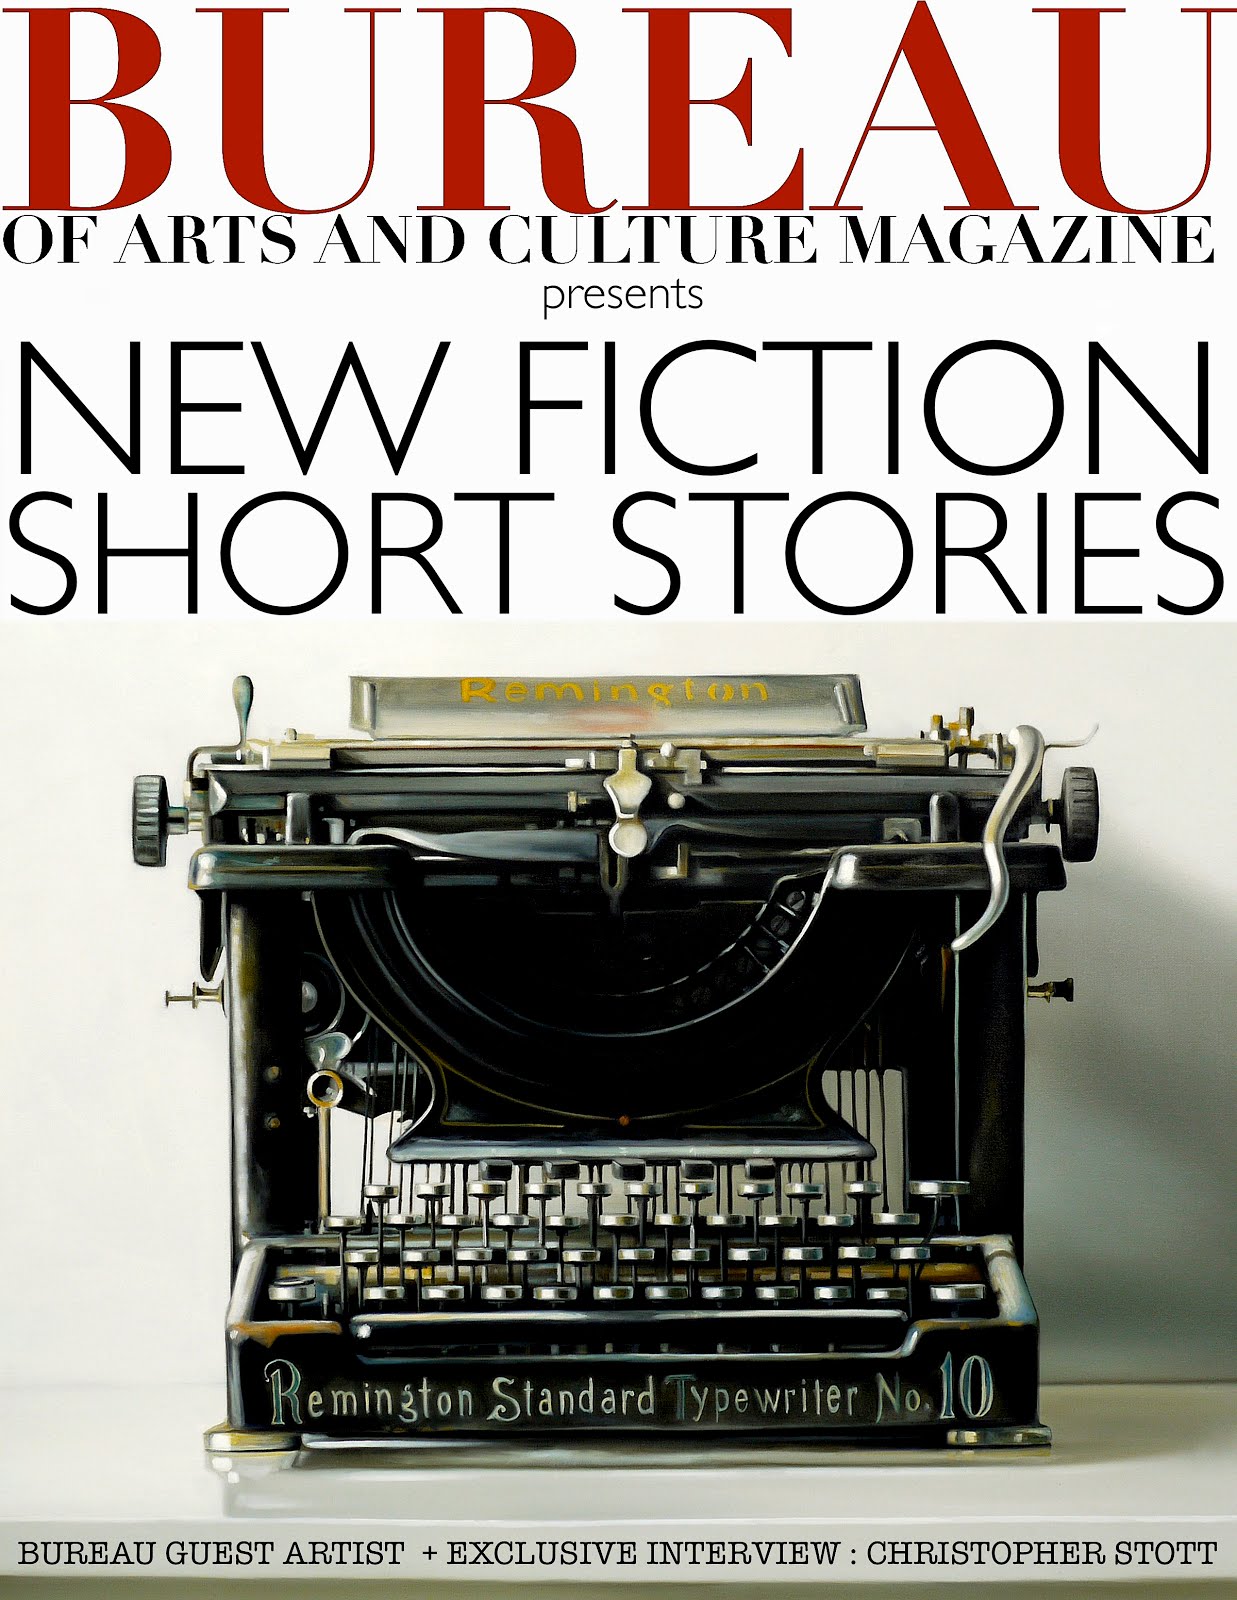 The NEW SHORT STORIES